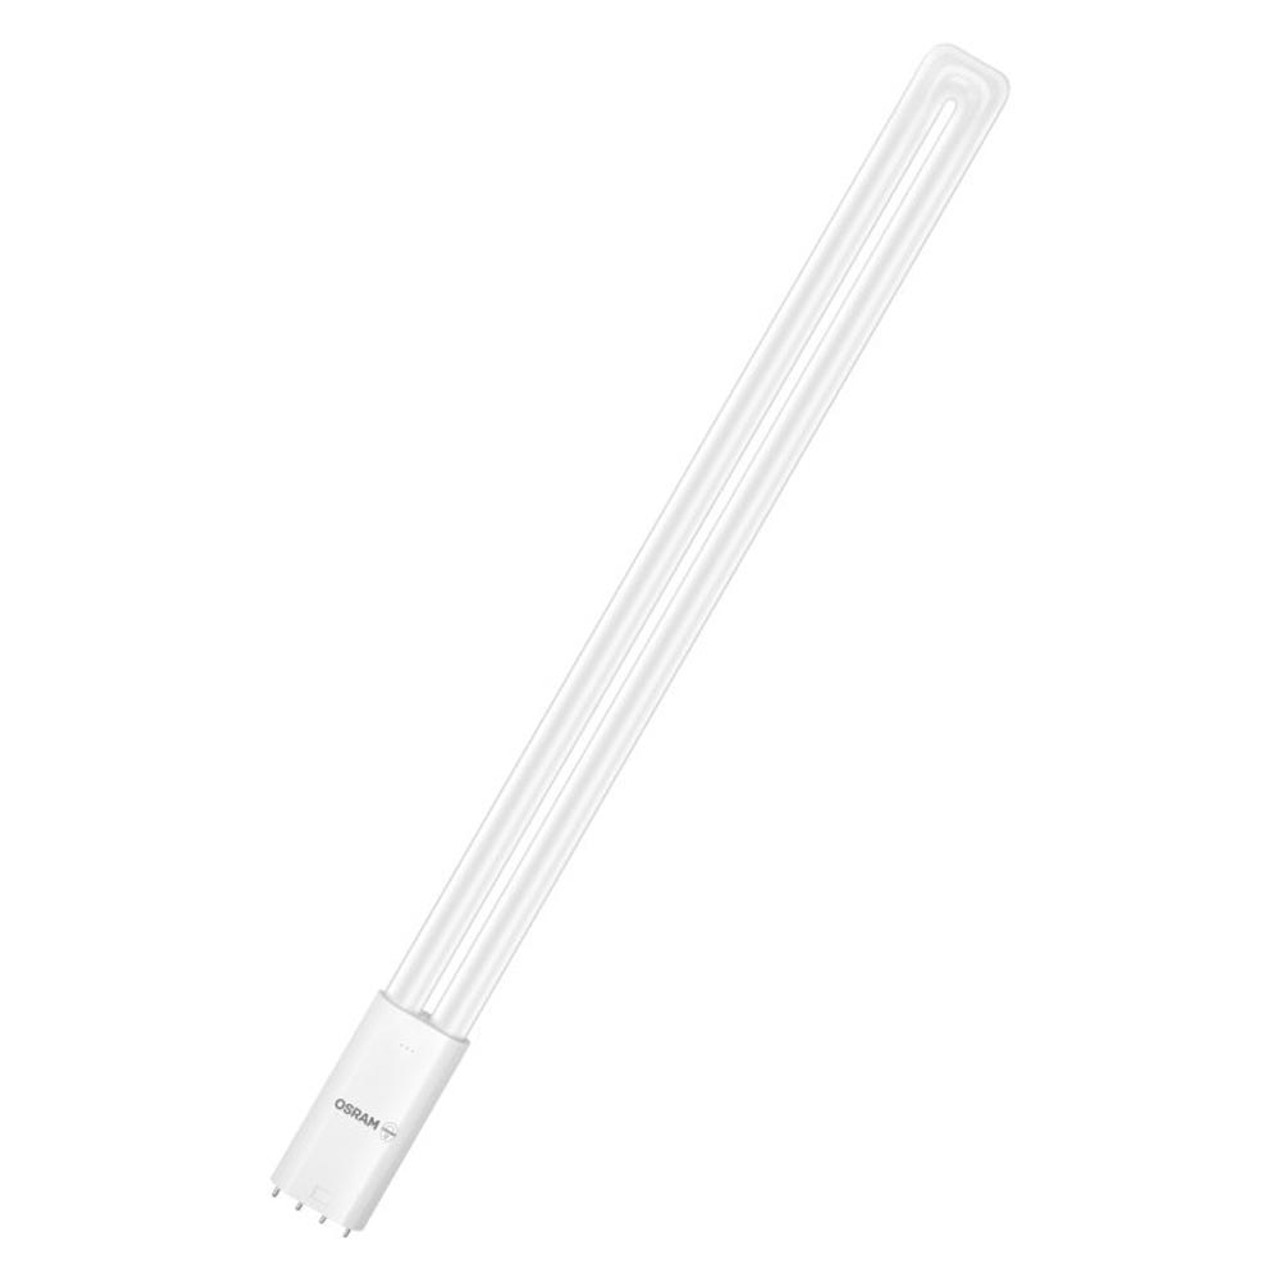 Ledvance LED PLL 25W (55W eq.) Warm White 4 Pin 2G11 High Frequency and AC Mains